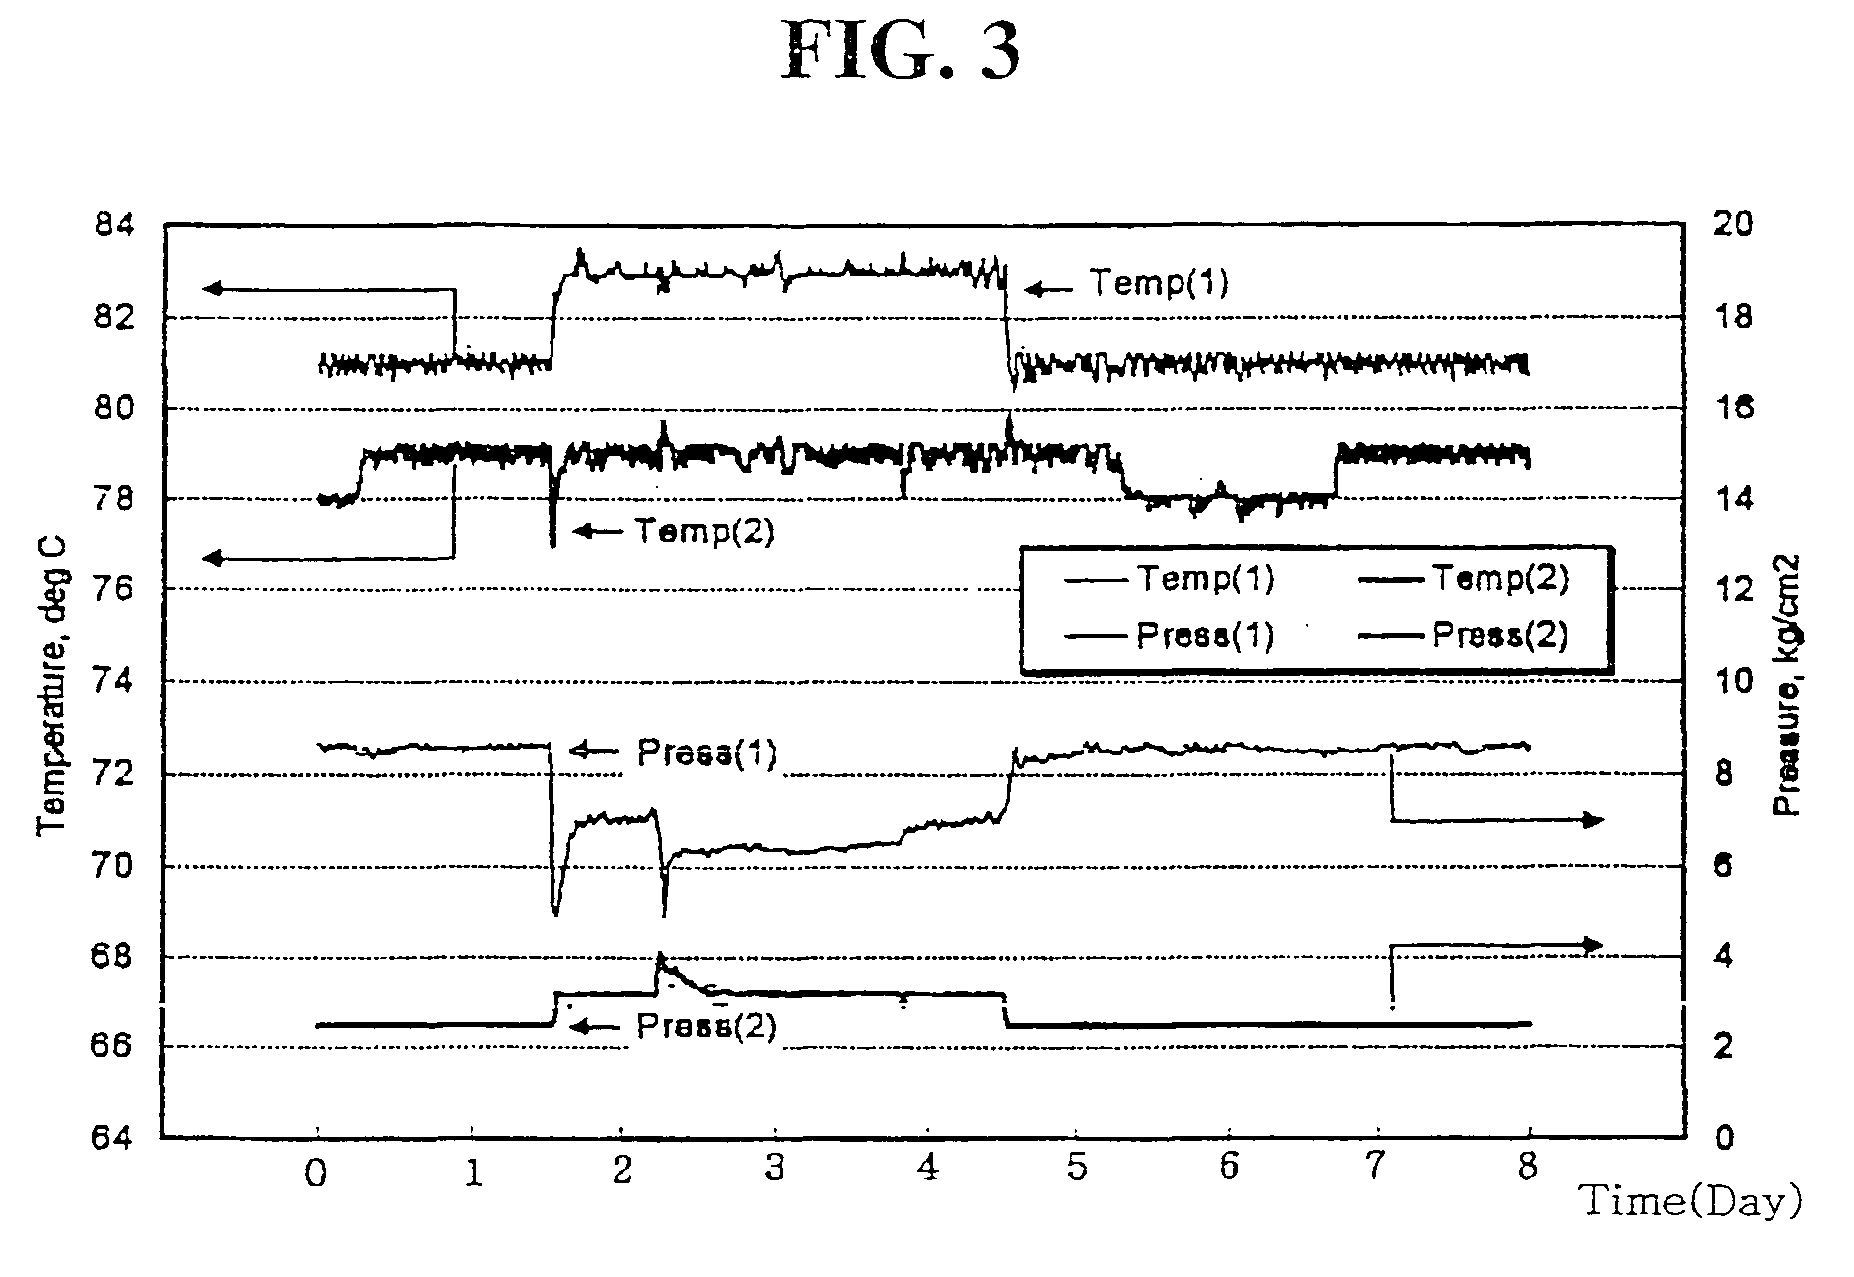 Method of estimating the properties of a polymer product